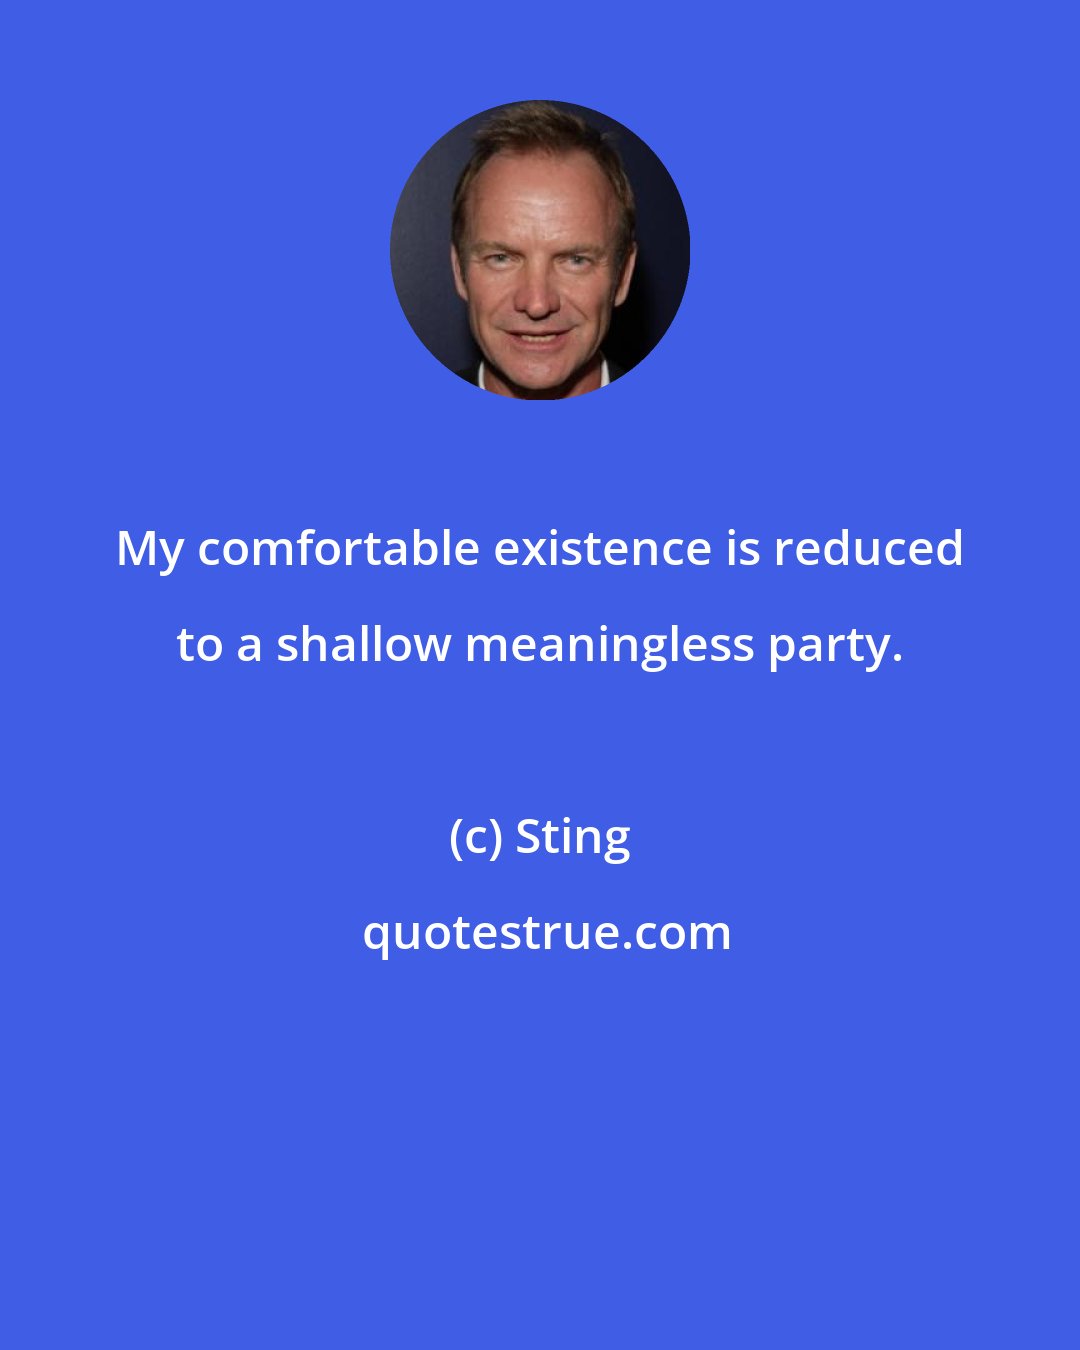 Sting: My comfortable existence is reduced to a shallow meaningless party.